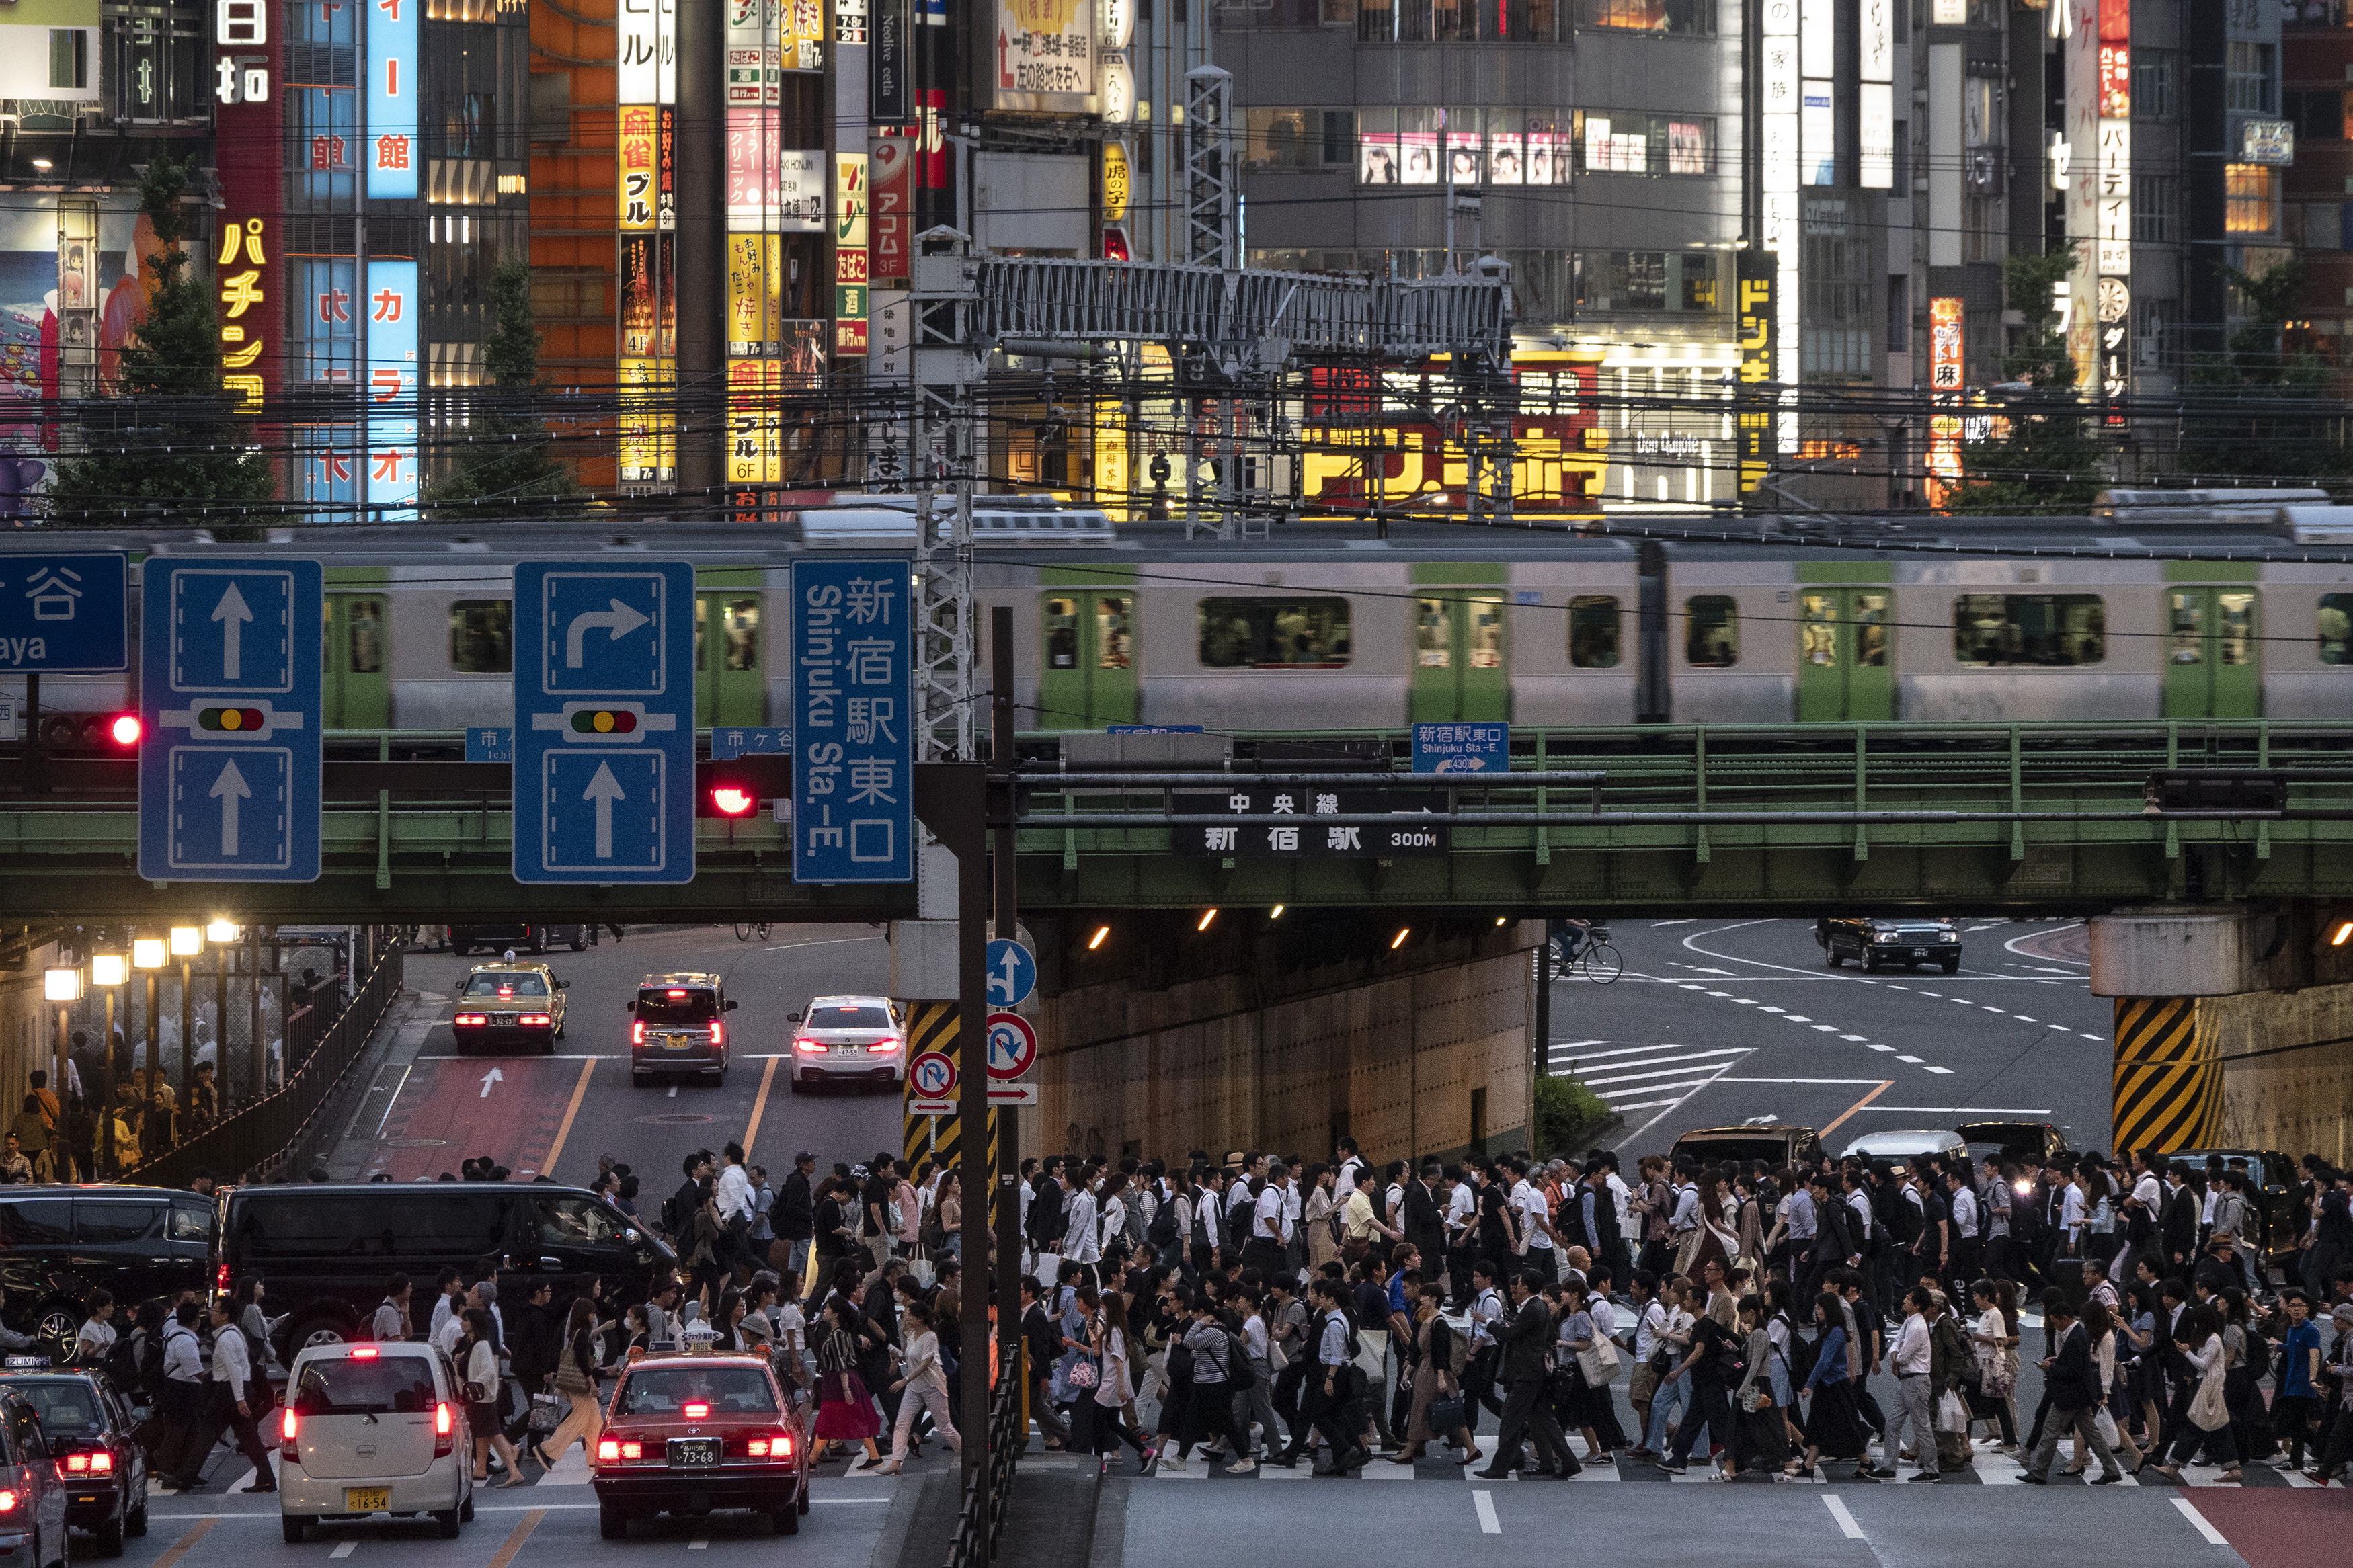 In this Tuesday, June 4, 2019, photo, a Yamanote Line train travels above commuters walking across the crossing during evening rush hours in the Shinjuku district of Tokyo. Operated by the East Japan Railway Co., the Yamanote Line in Tokyo makes a loop around the center of the city, connecting 29 stations that include key stops such as Shinjuku, Shibuya and Ikebukuro. A complete loop of about an hour offers scenes of Japanese daily lives. (AP Photo/Jae C. Hong)